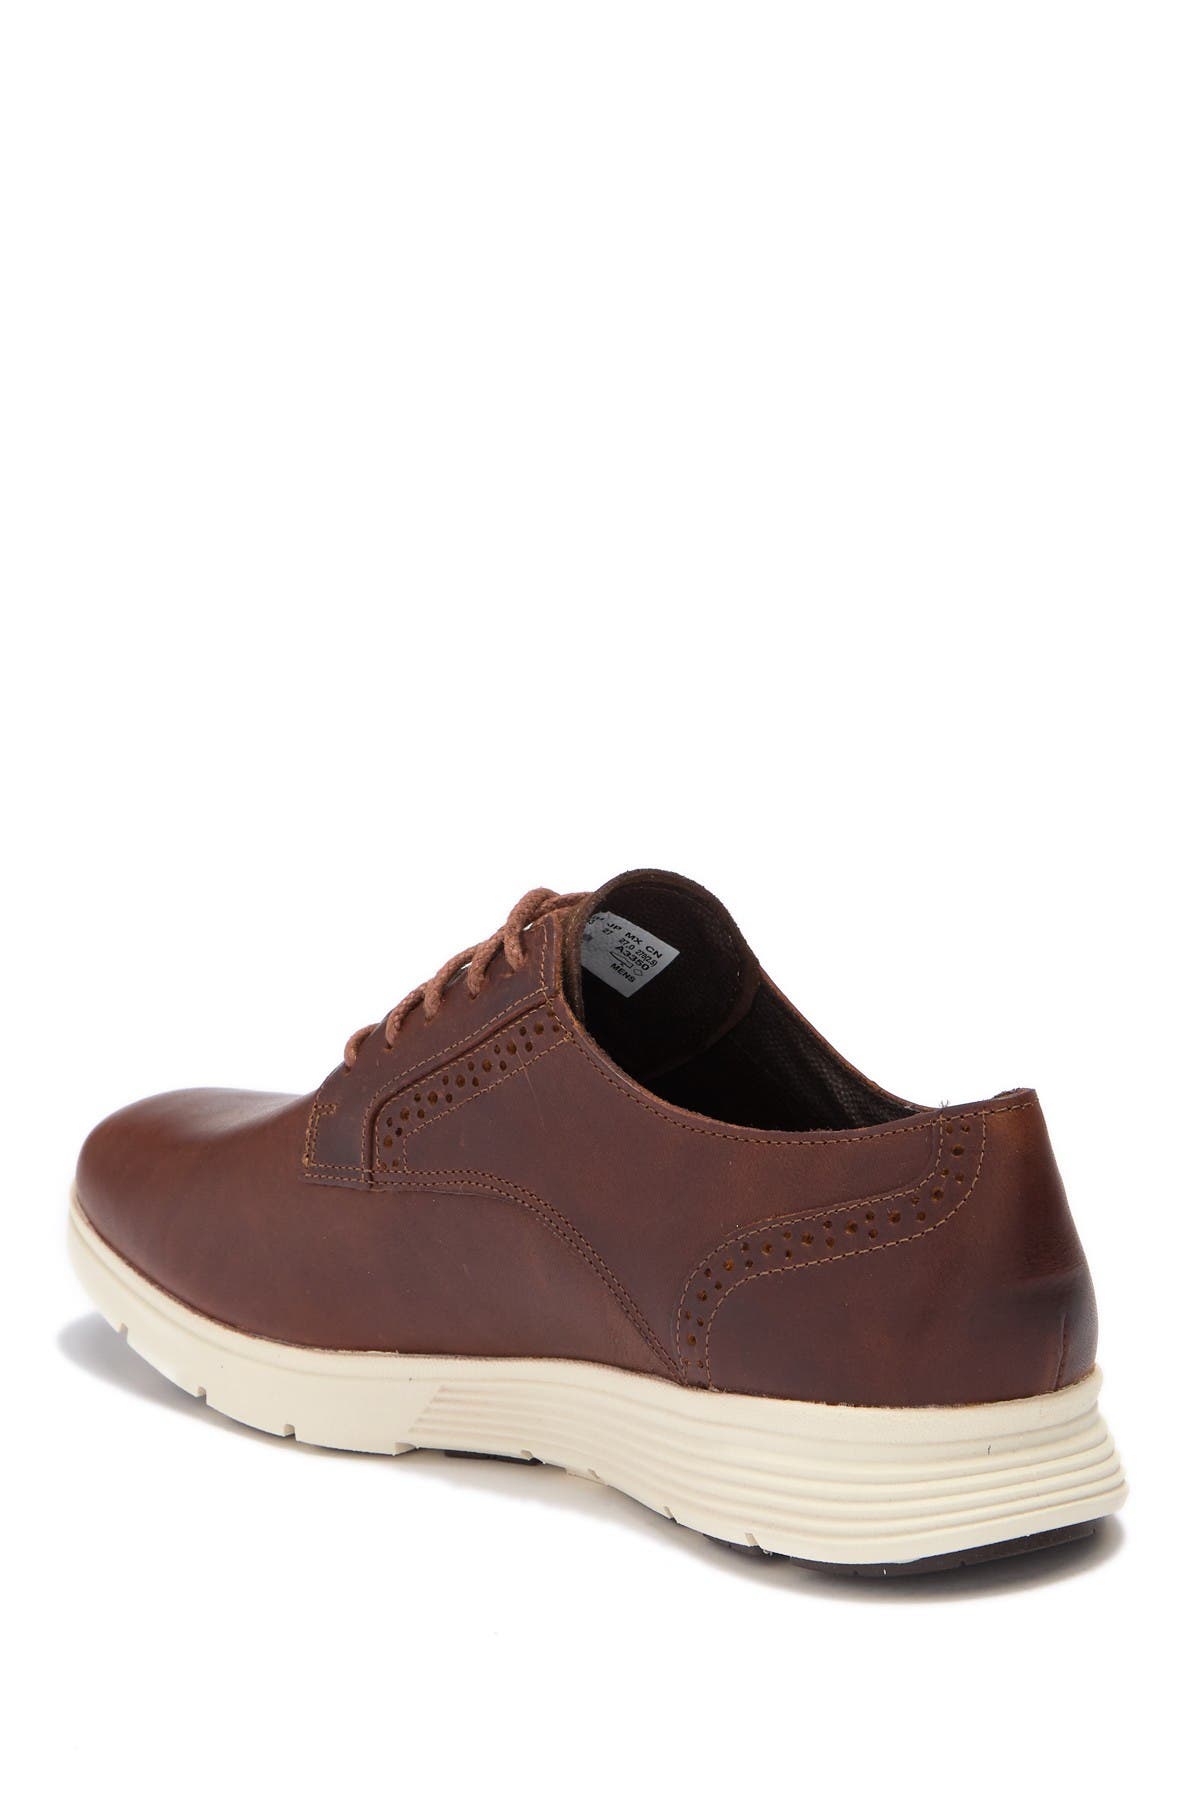 timberland franklin leather sneaker